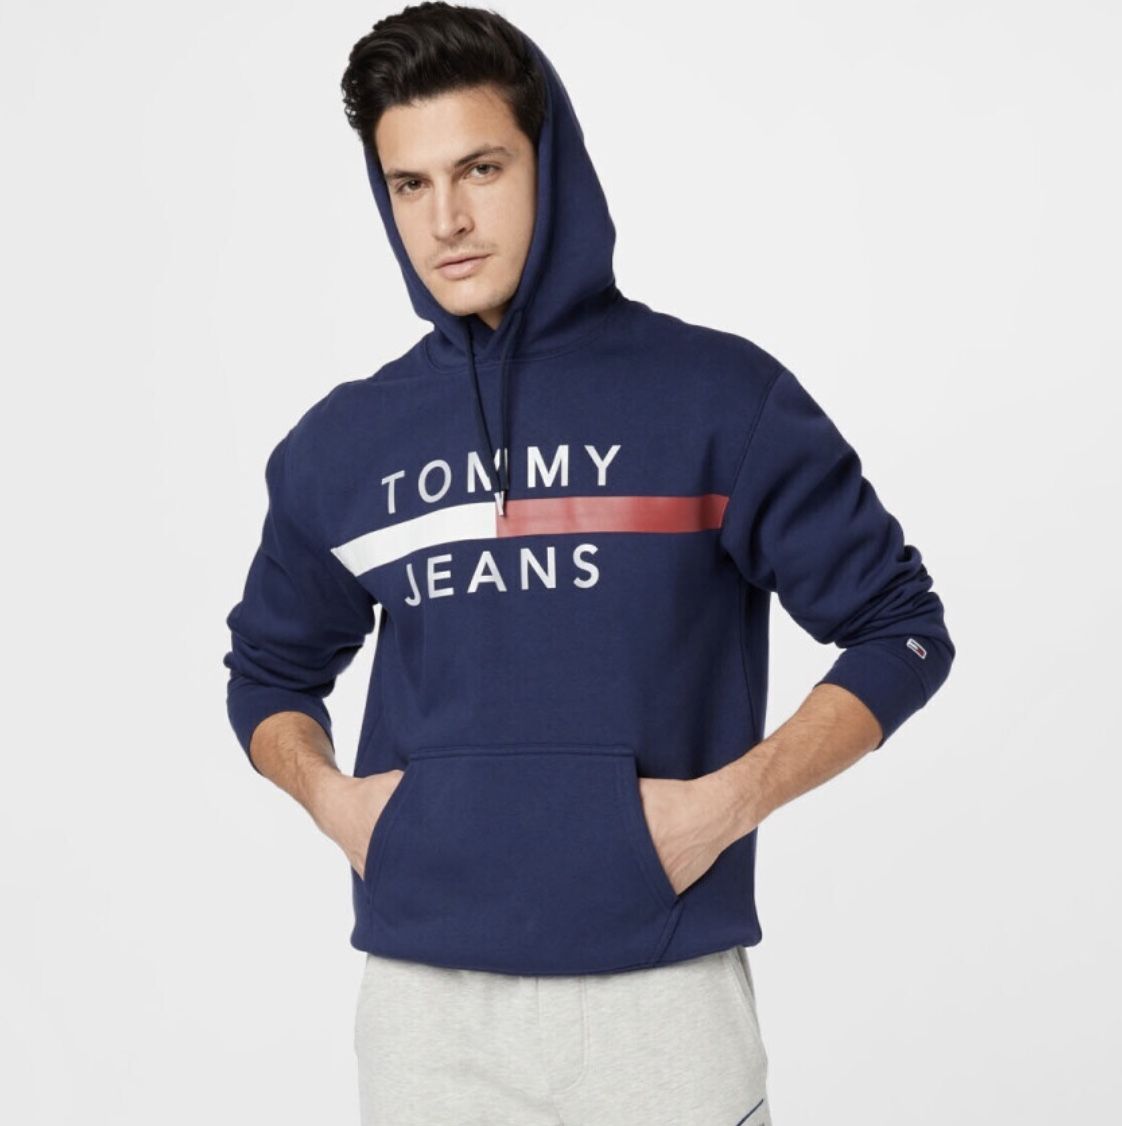 Tommy Jeans Reflective Flag Hoodie ab 33,99€ (statt 76€)